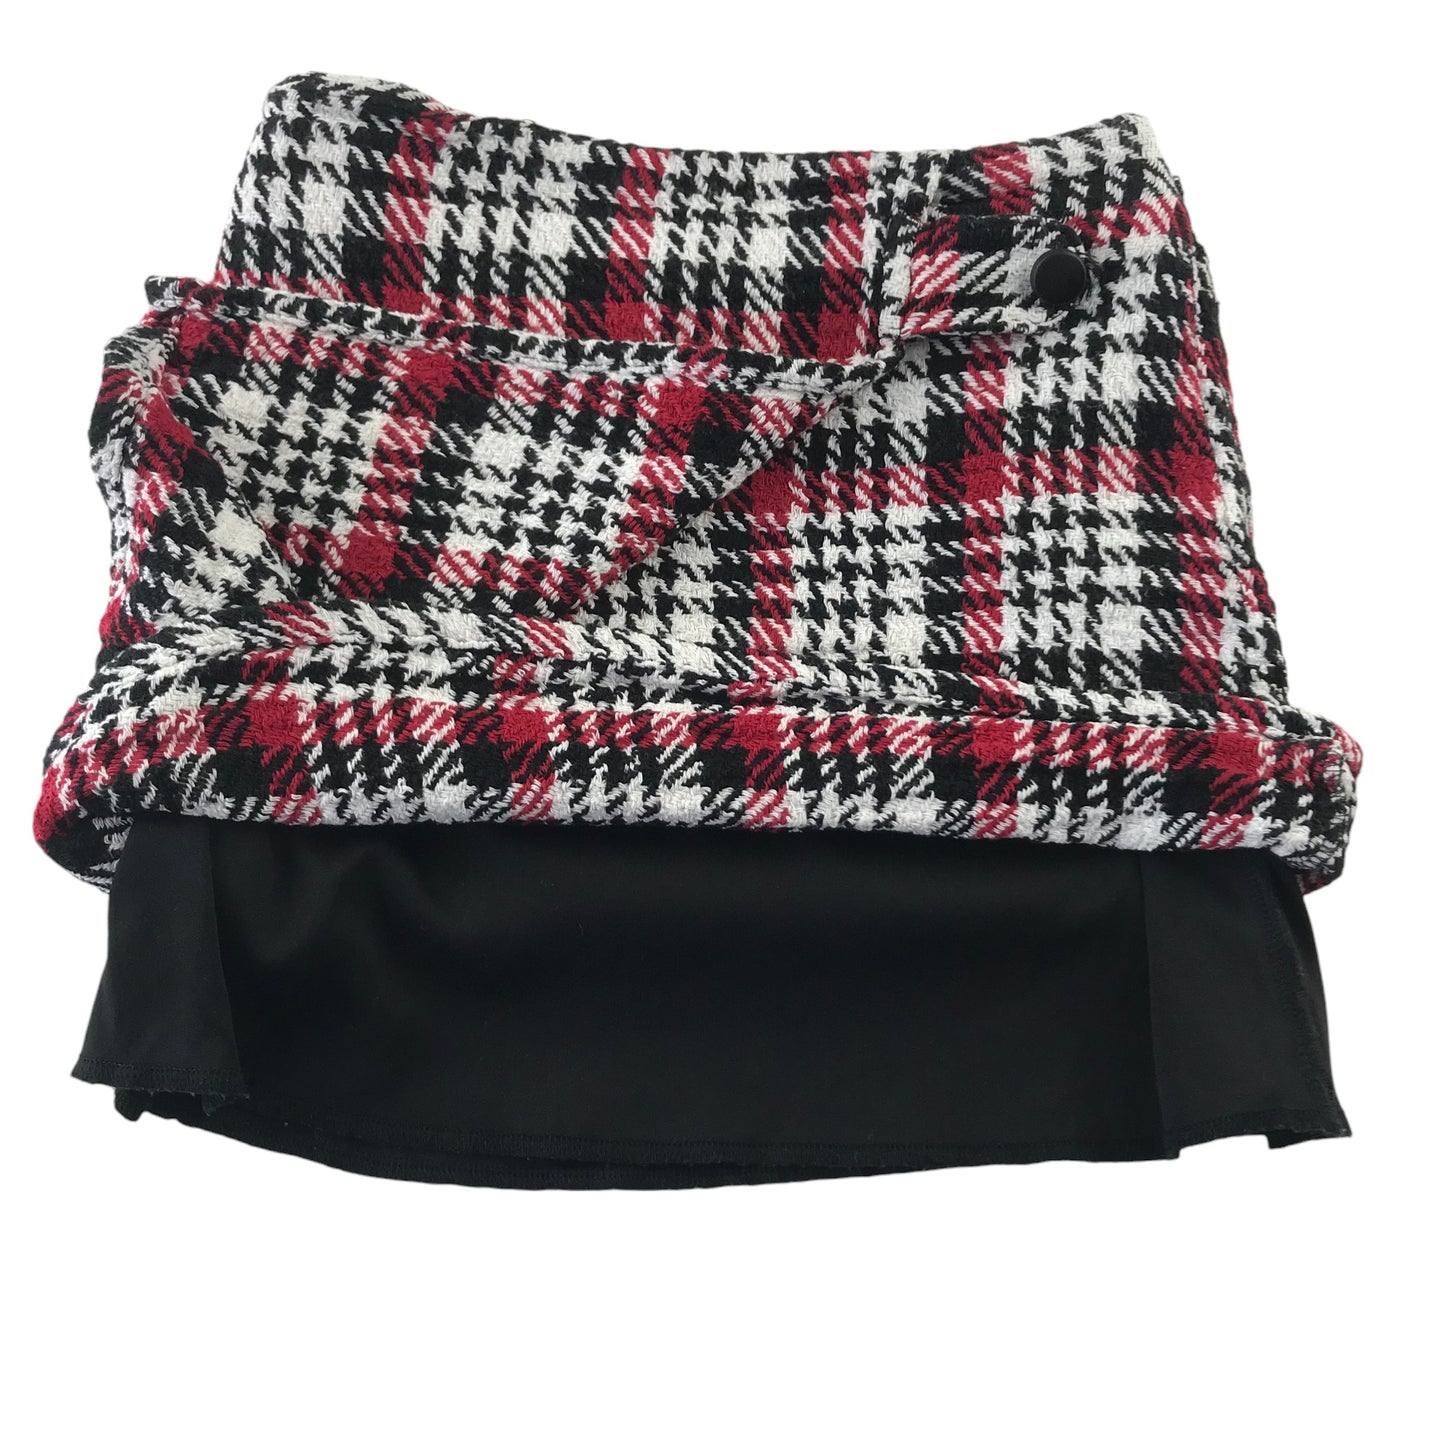 Primark Skirt Age 7 White Black and Red Checked Houndstooth